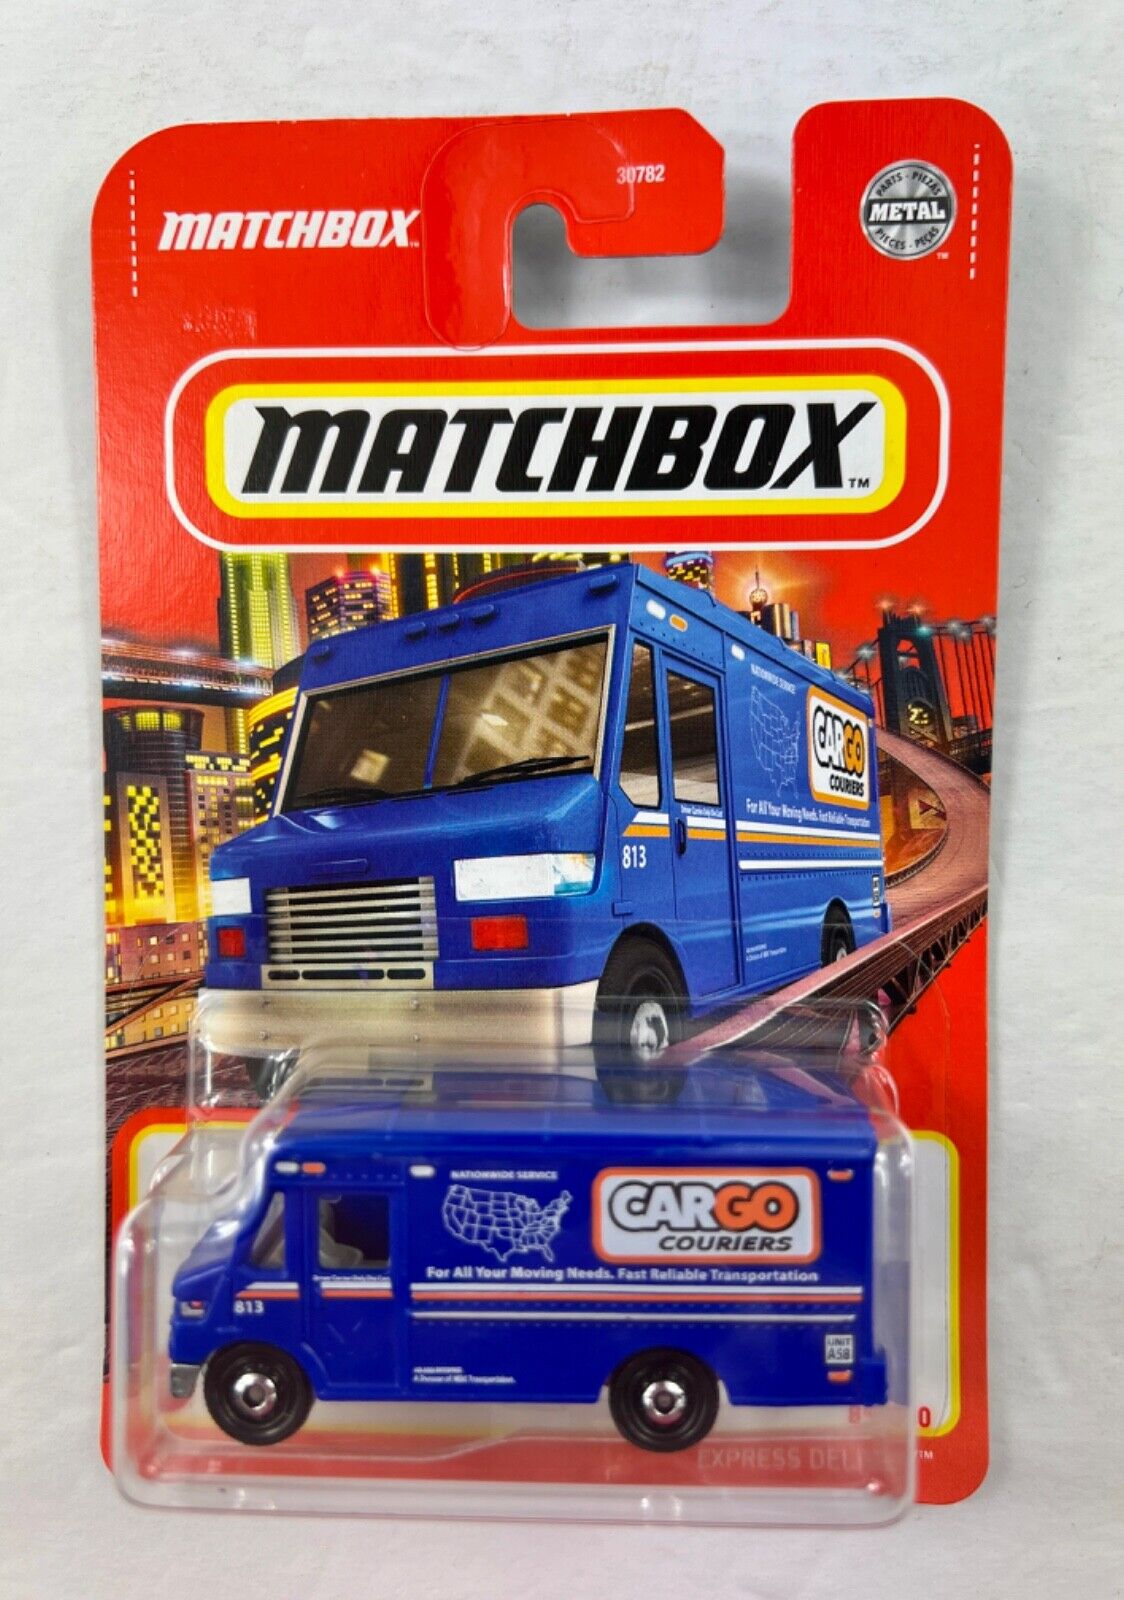 2022 MATCHBOX Express Delivery CARGO Box Van - New 1:64 Diecast - Free Ship  T19